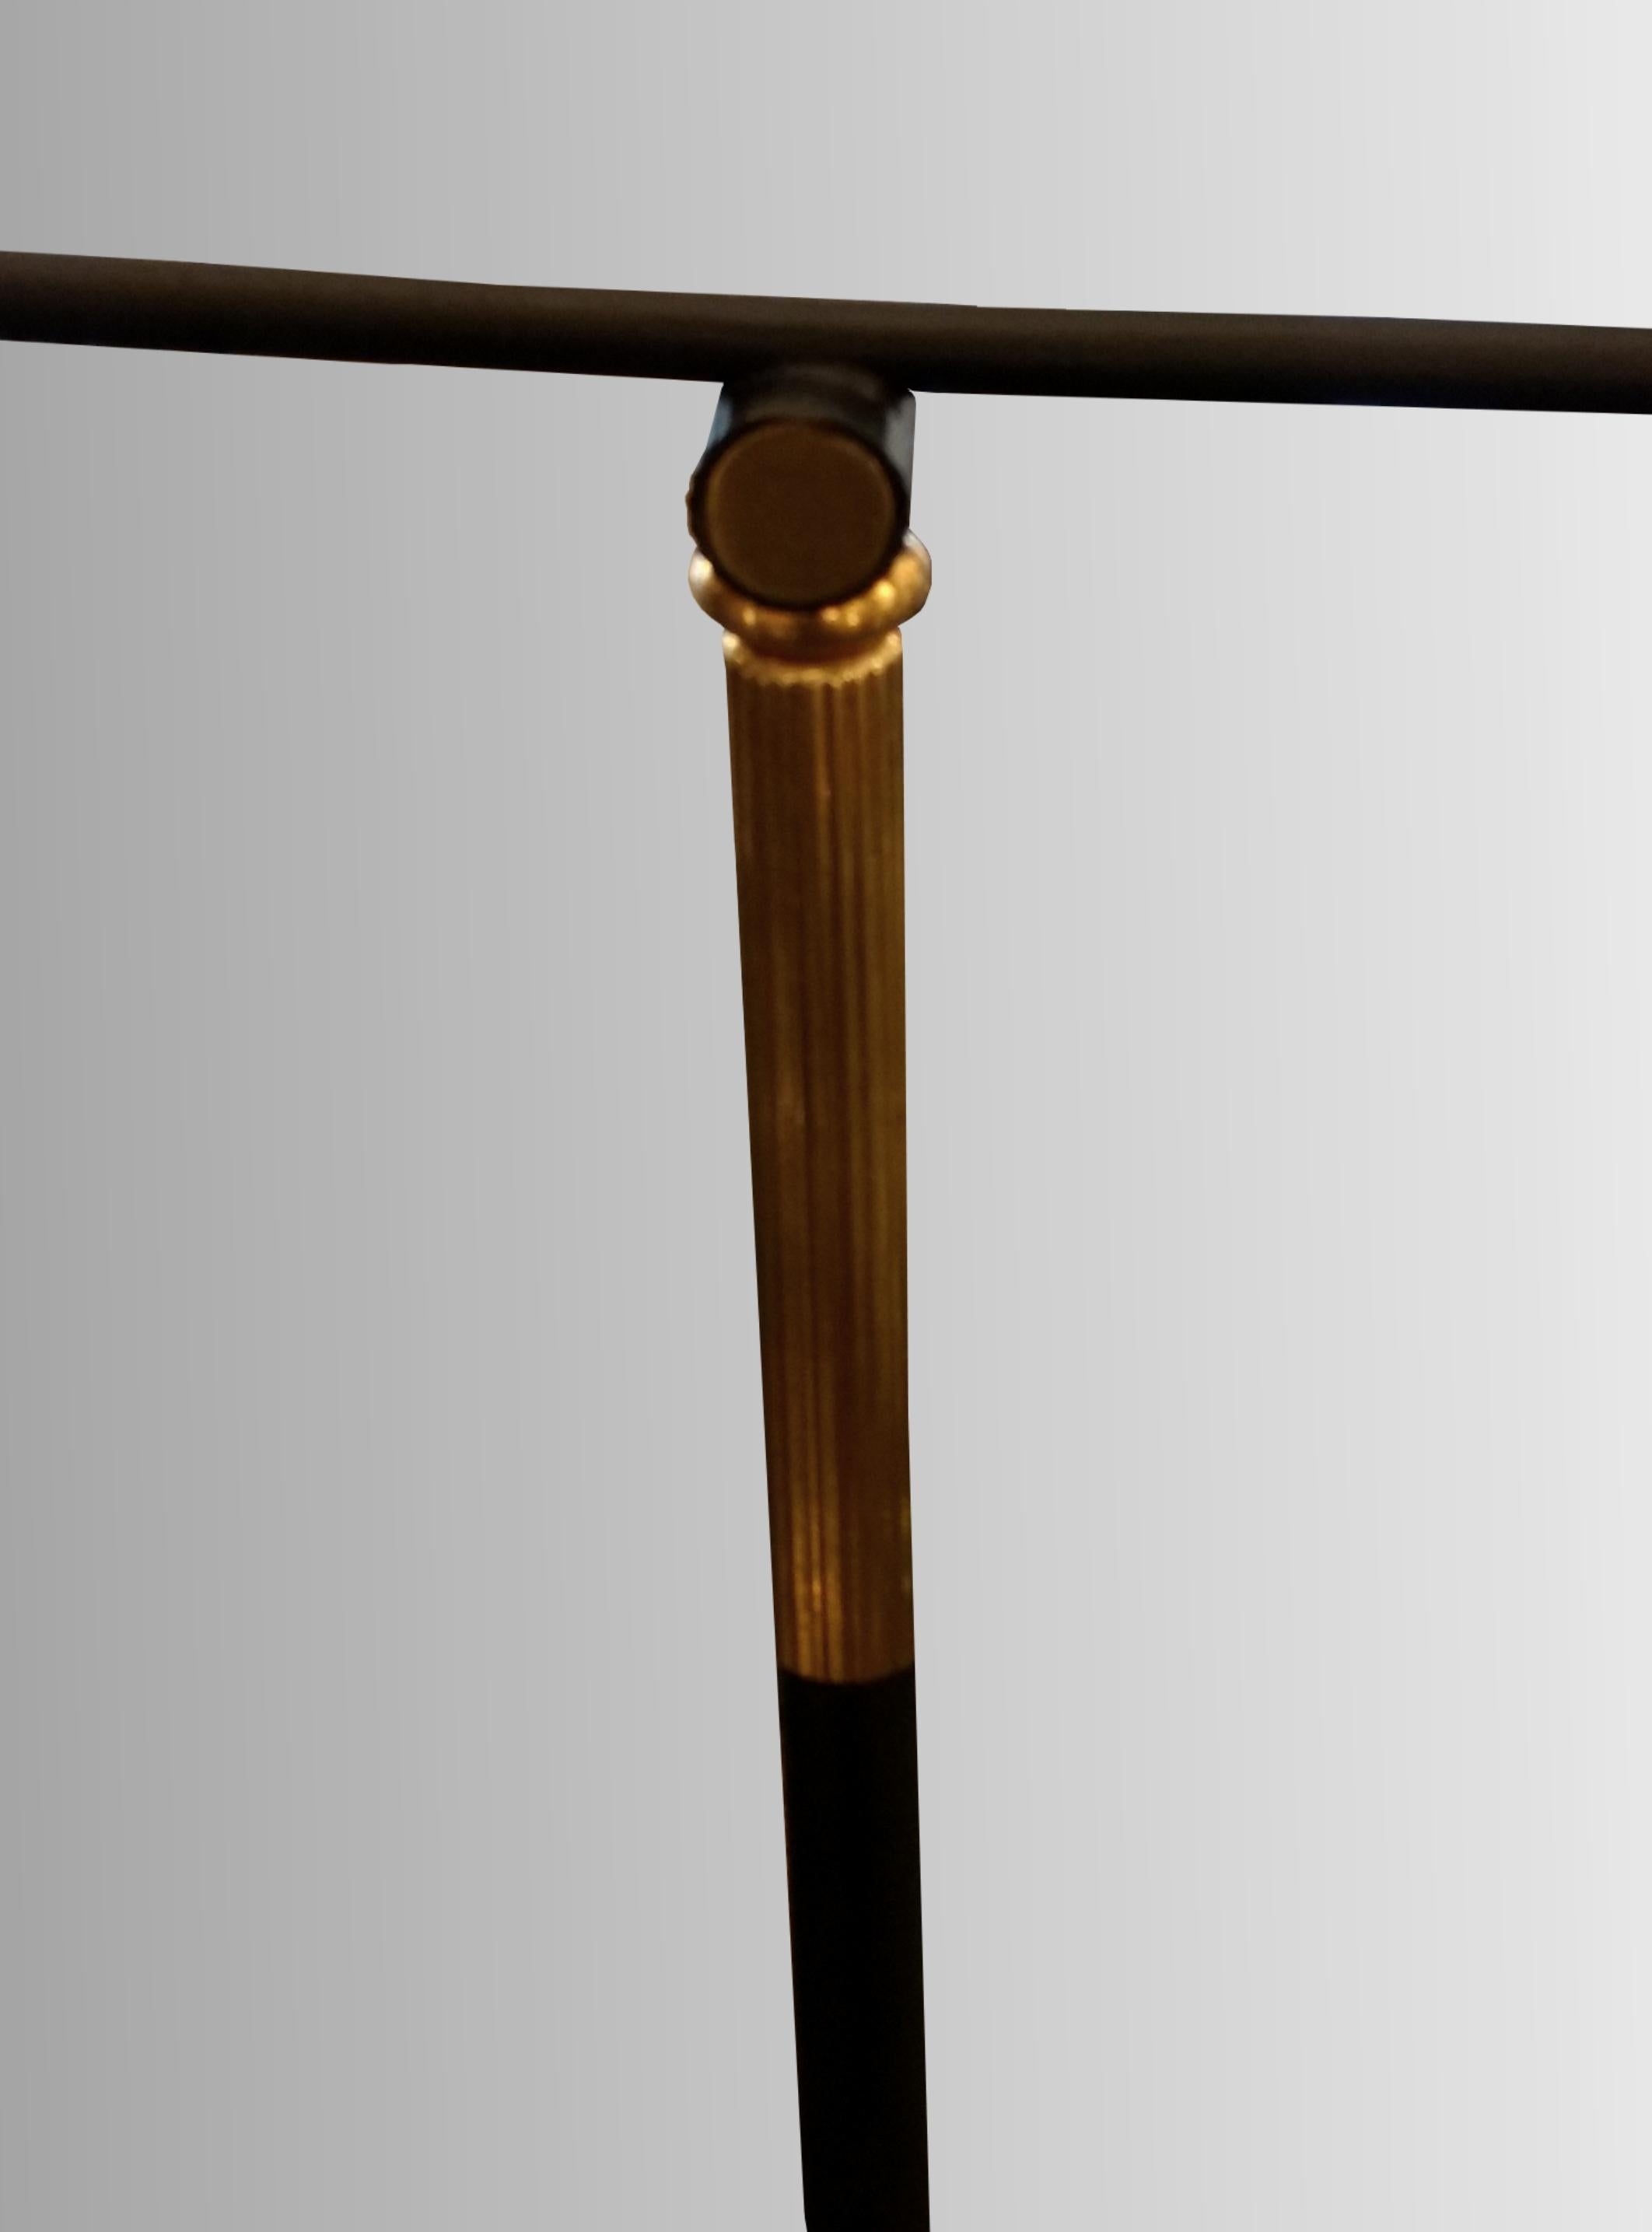 Brass T 644 Floor Lamp by Maison Lunel, France, circa 1950 For Sale